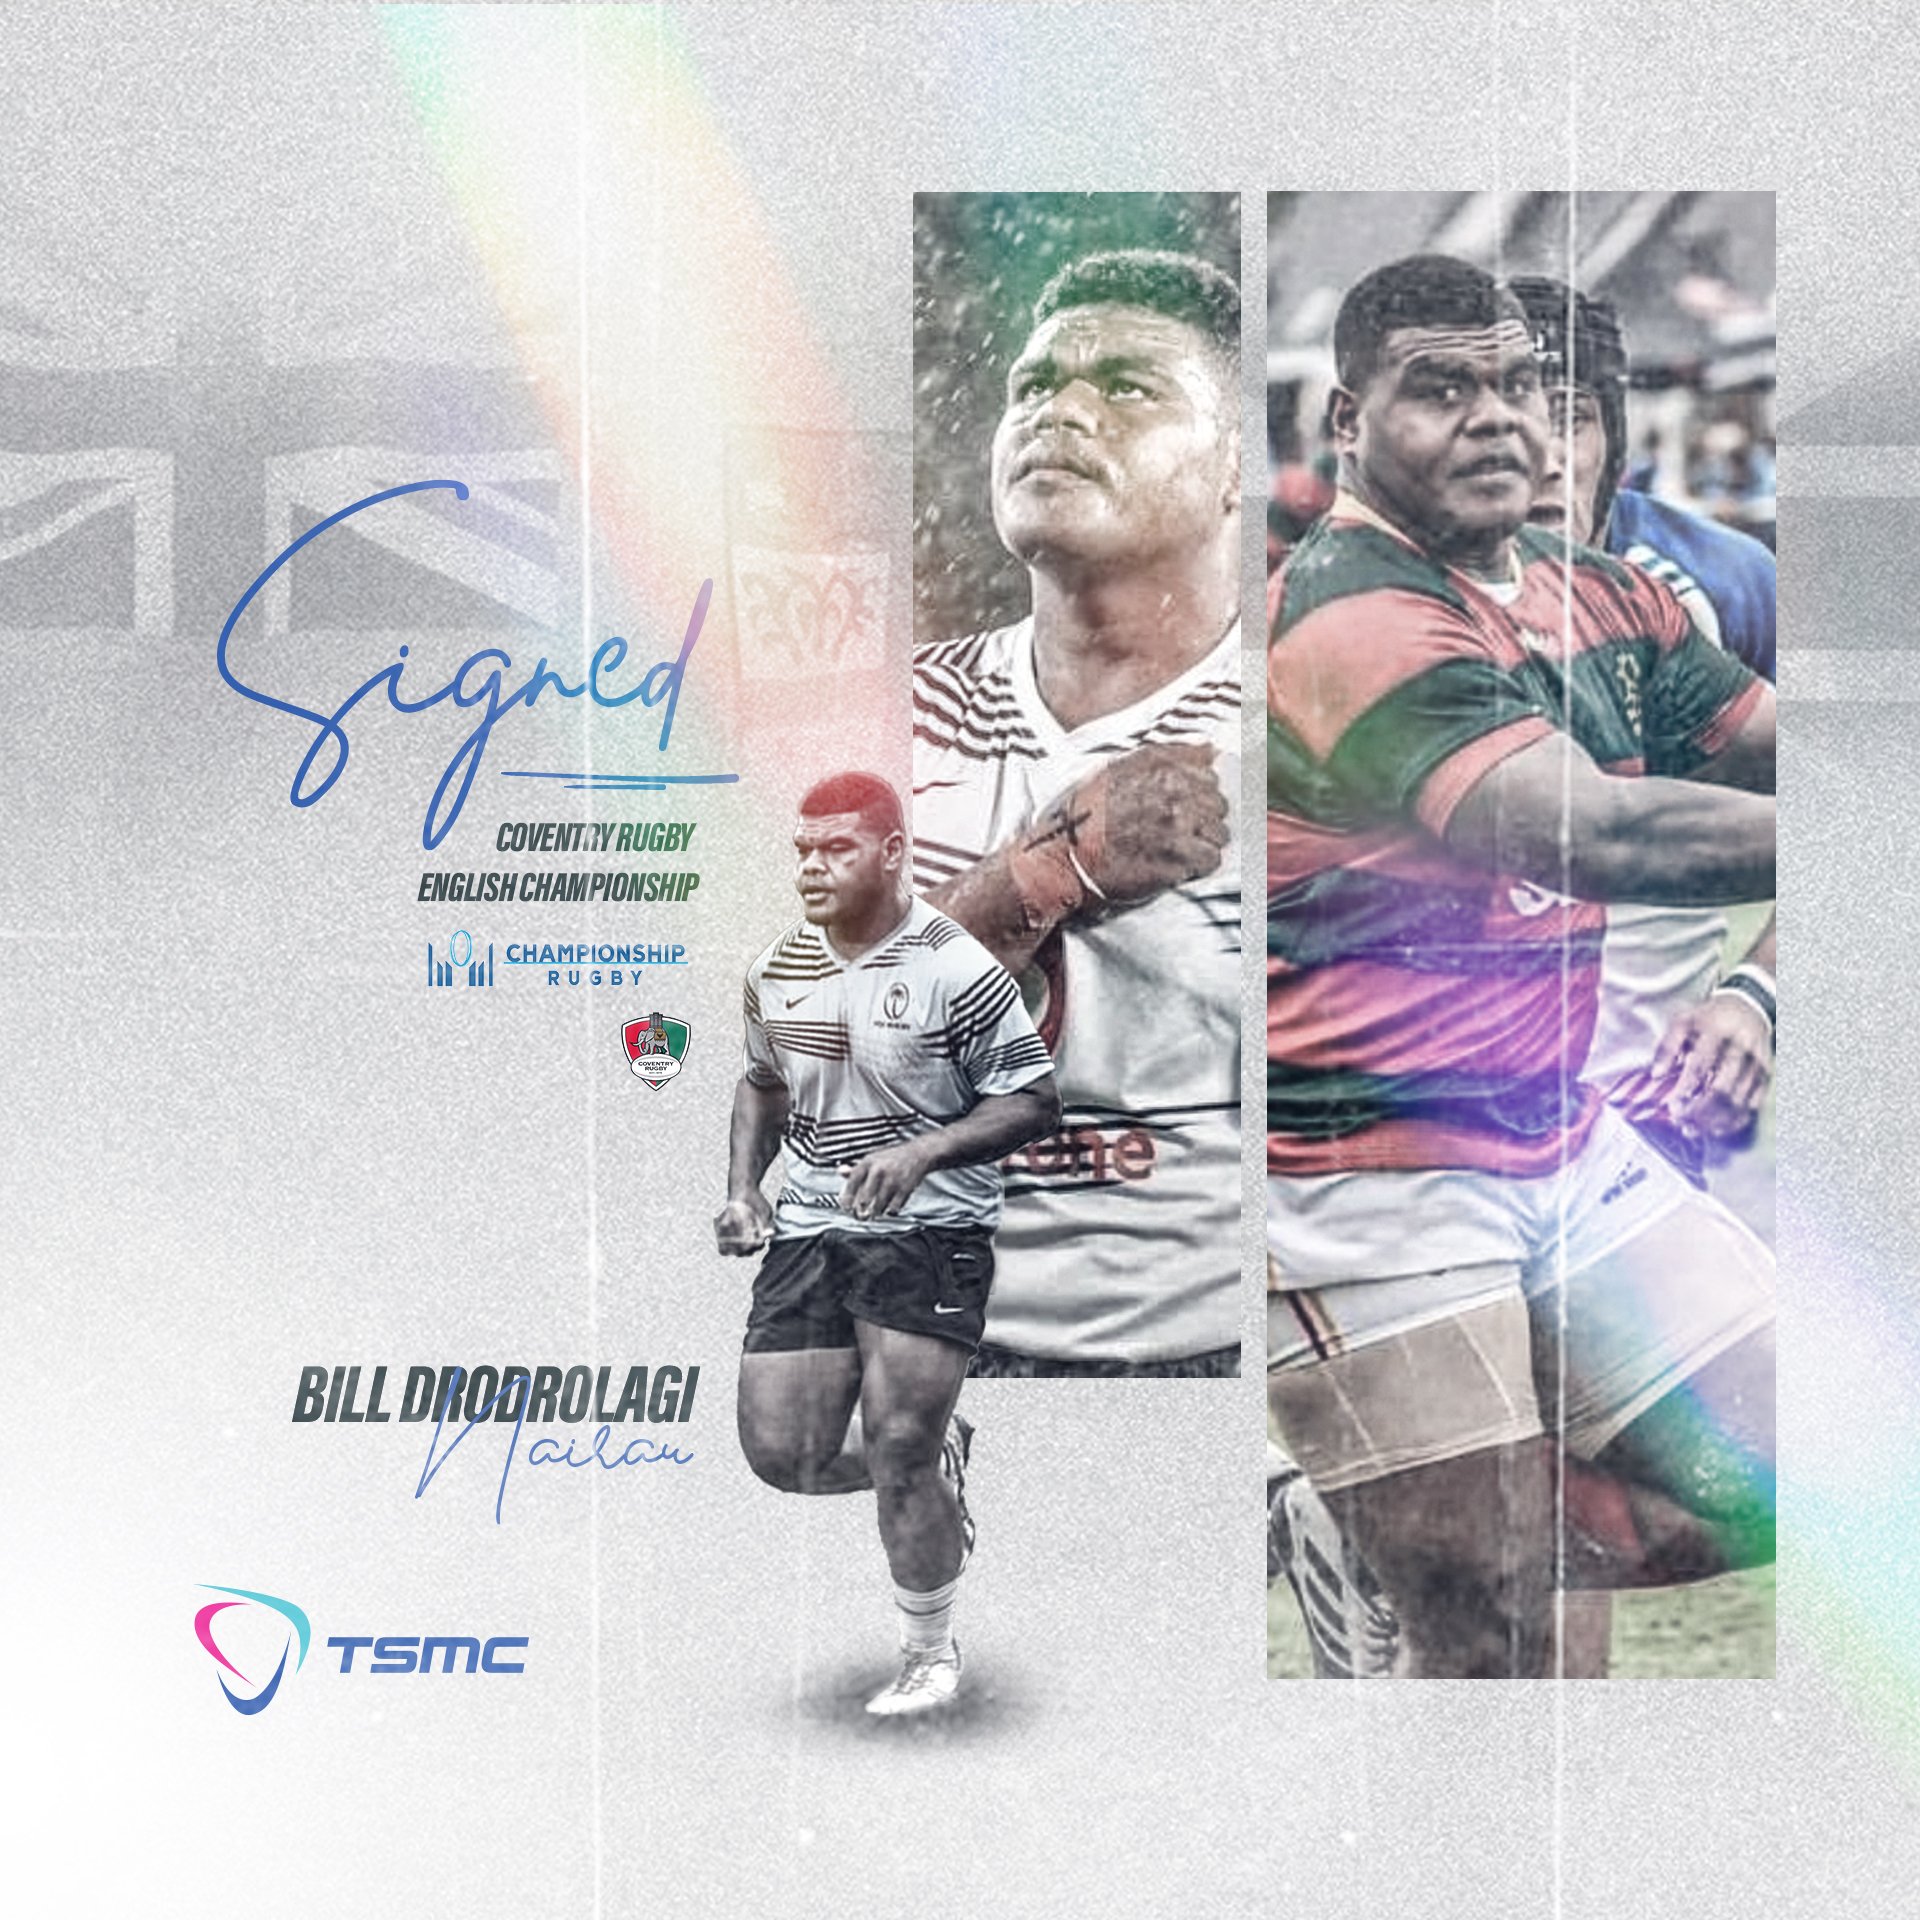 2023/24 Championship Fixtures Announced - Coventry Rugby